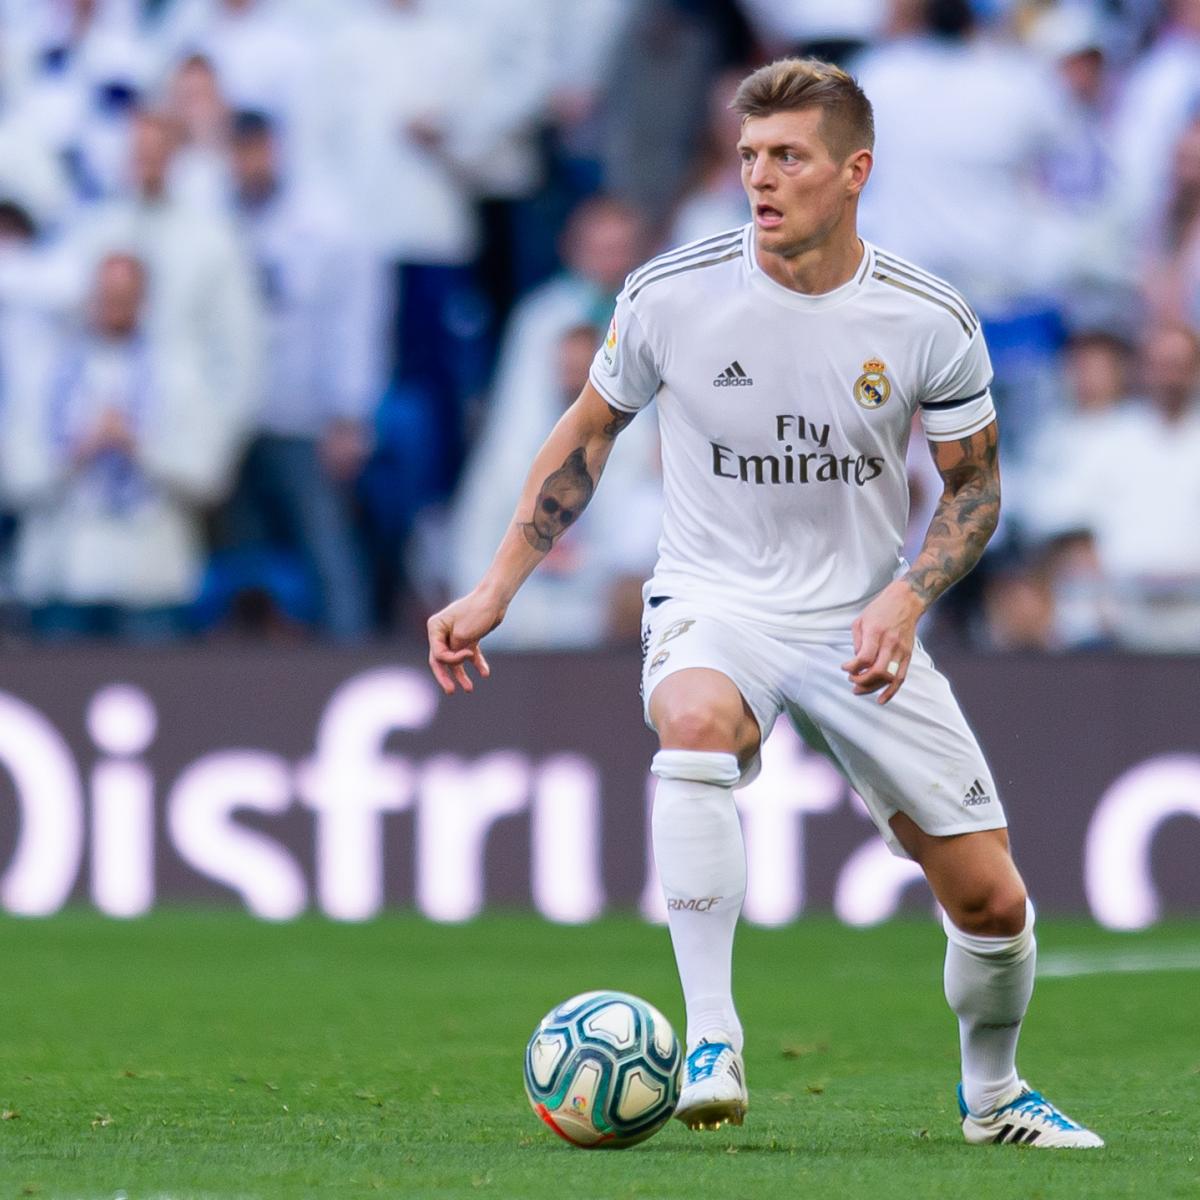 Watch Toni Kroos score direct from a corner as Real Madrid take on